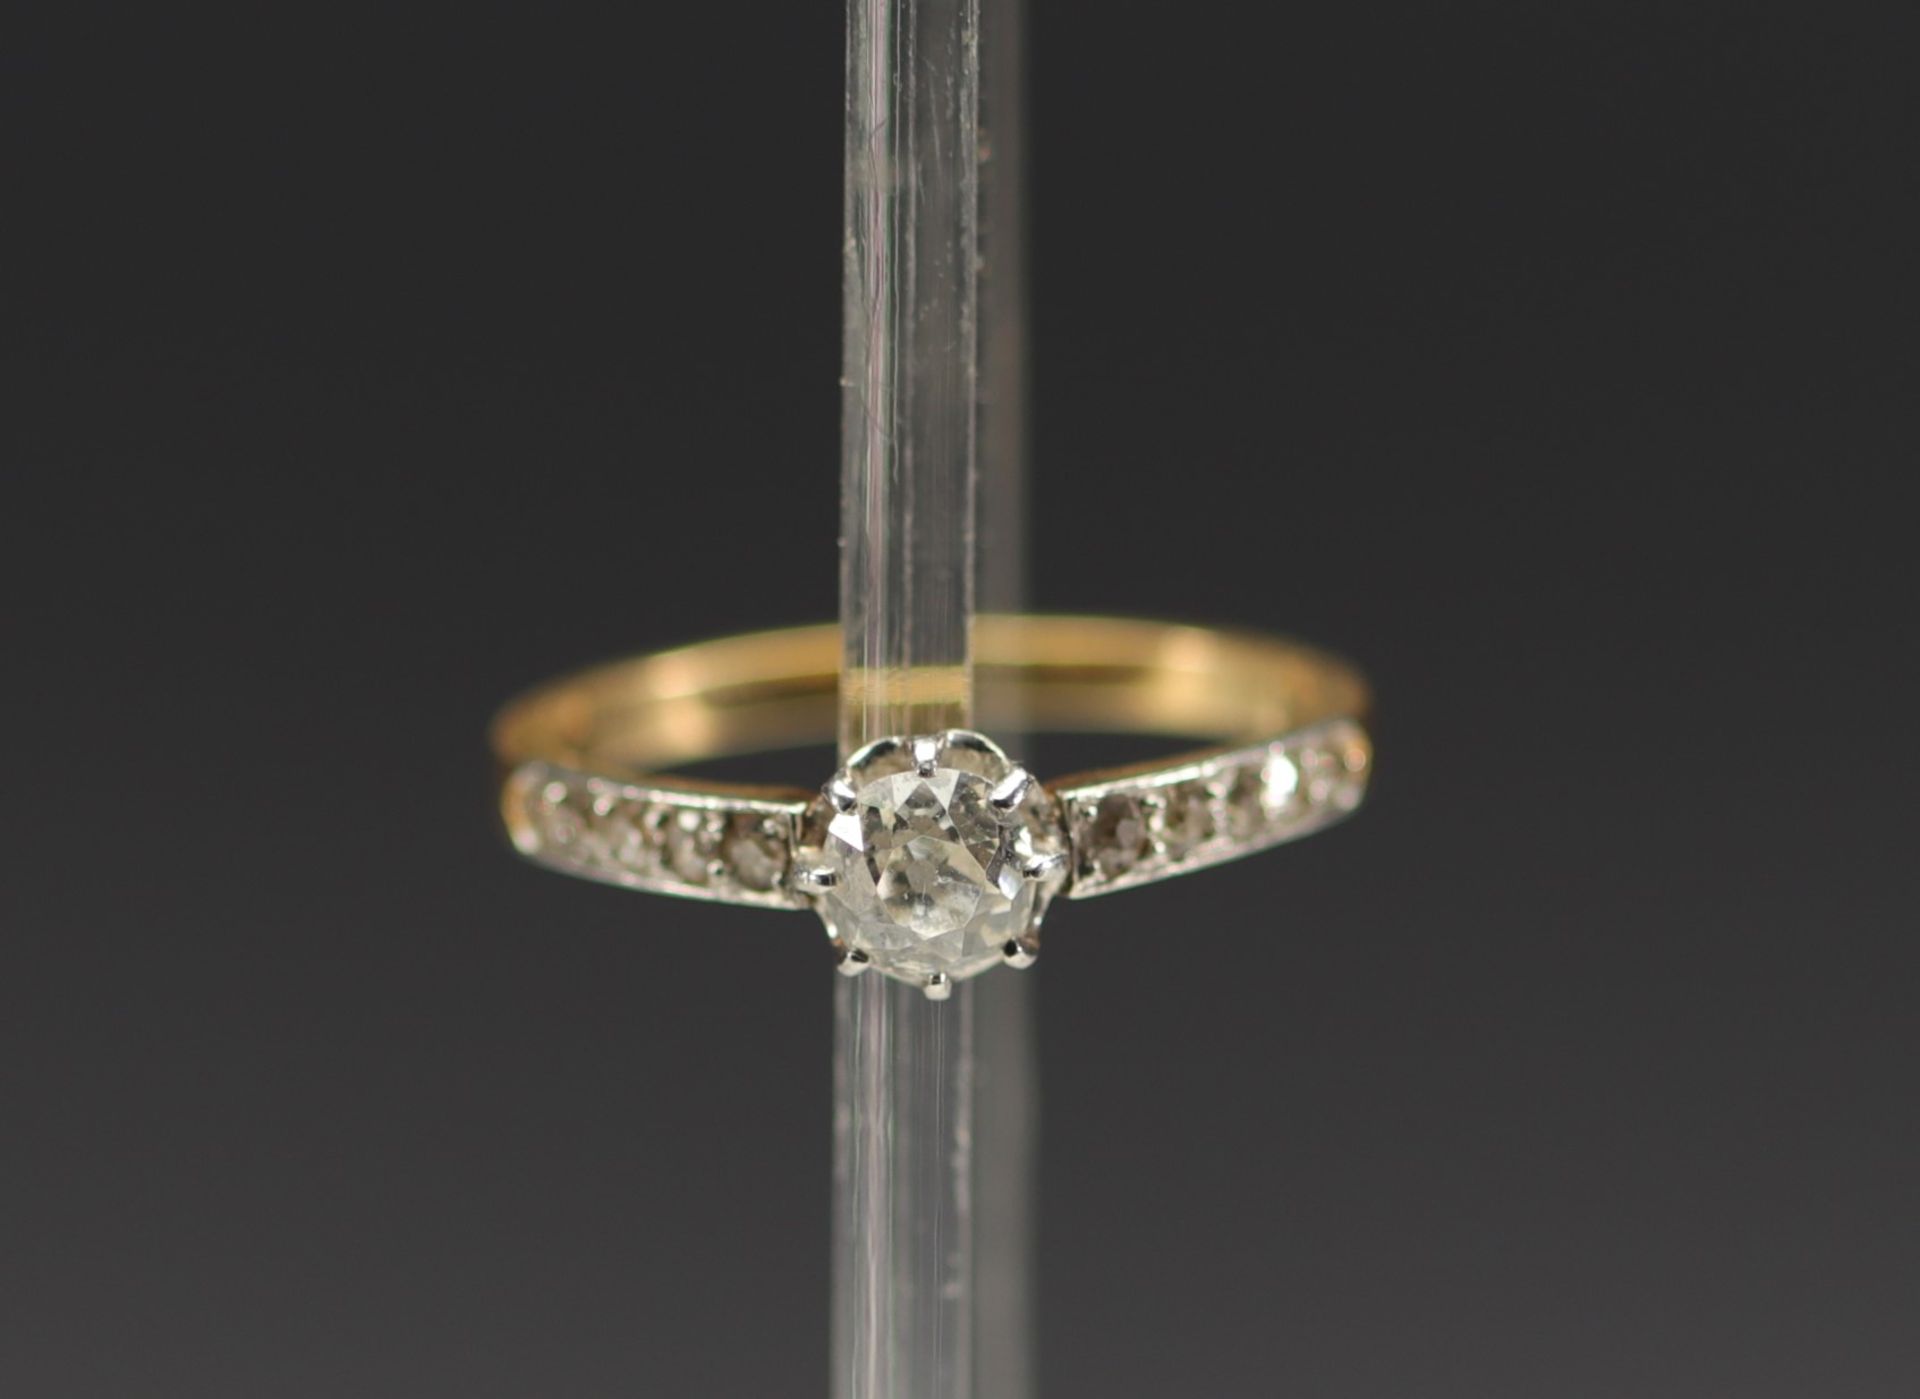 Ring in 18k gold with a central 0.5 carat diamond weighing 2.4g. - Bild 2 aus 2